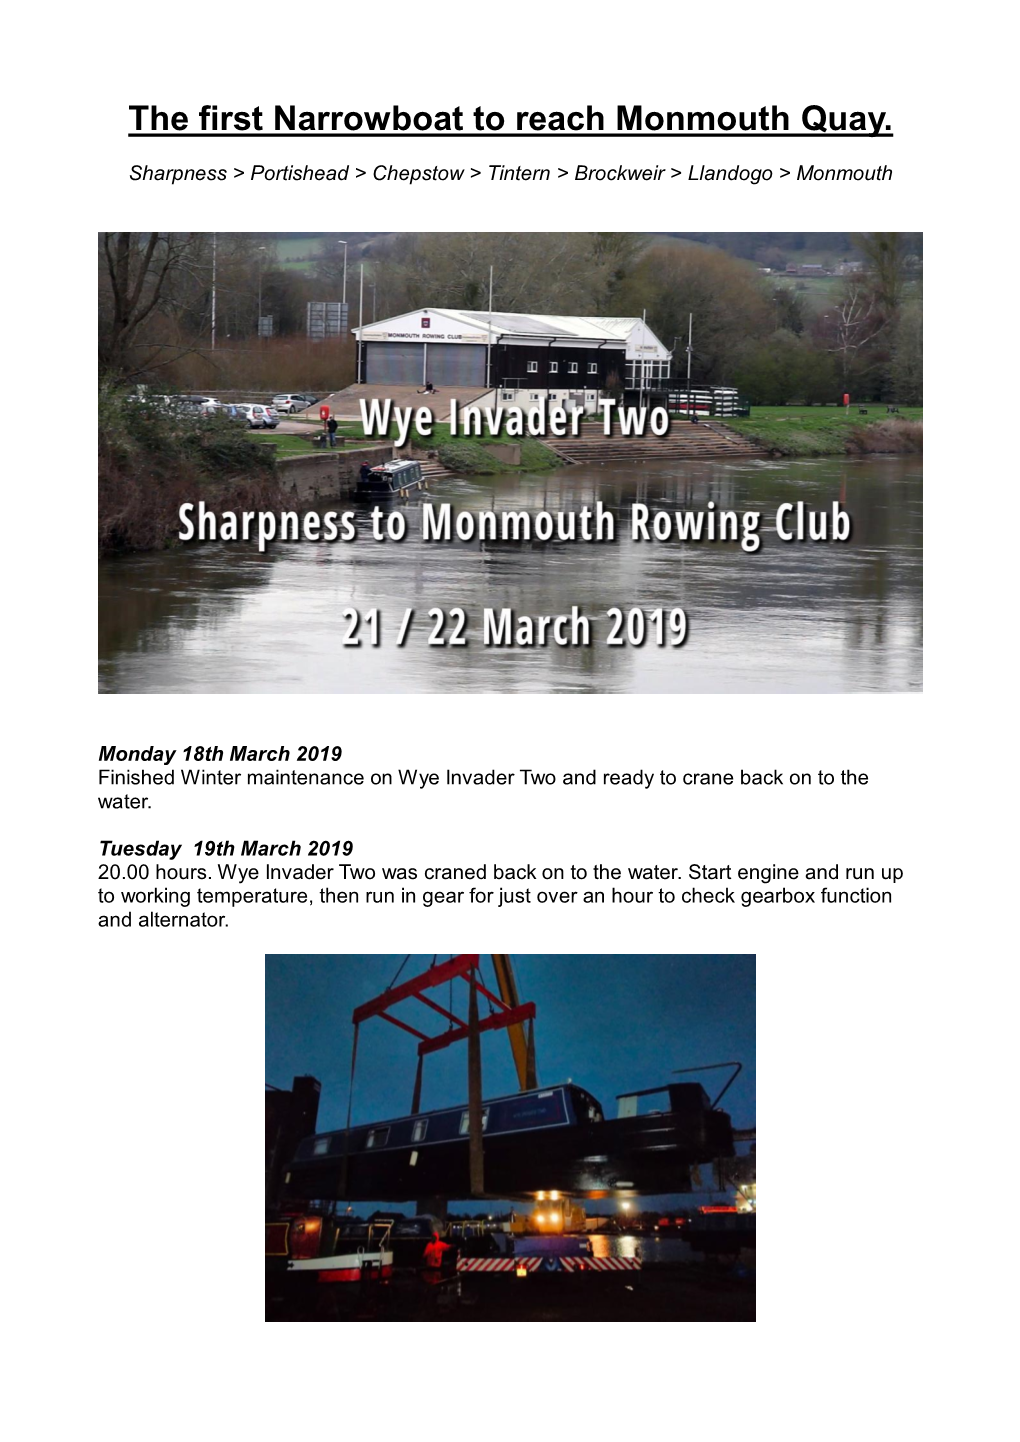 The First Narrowboat to Reach Monmouth Quay